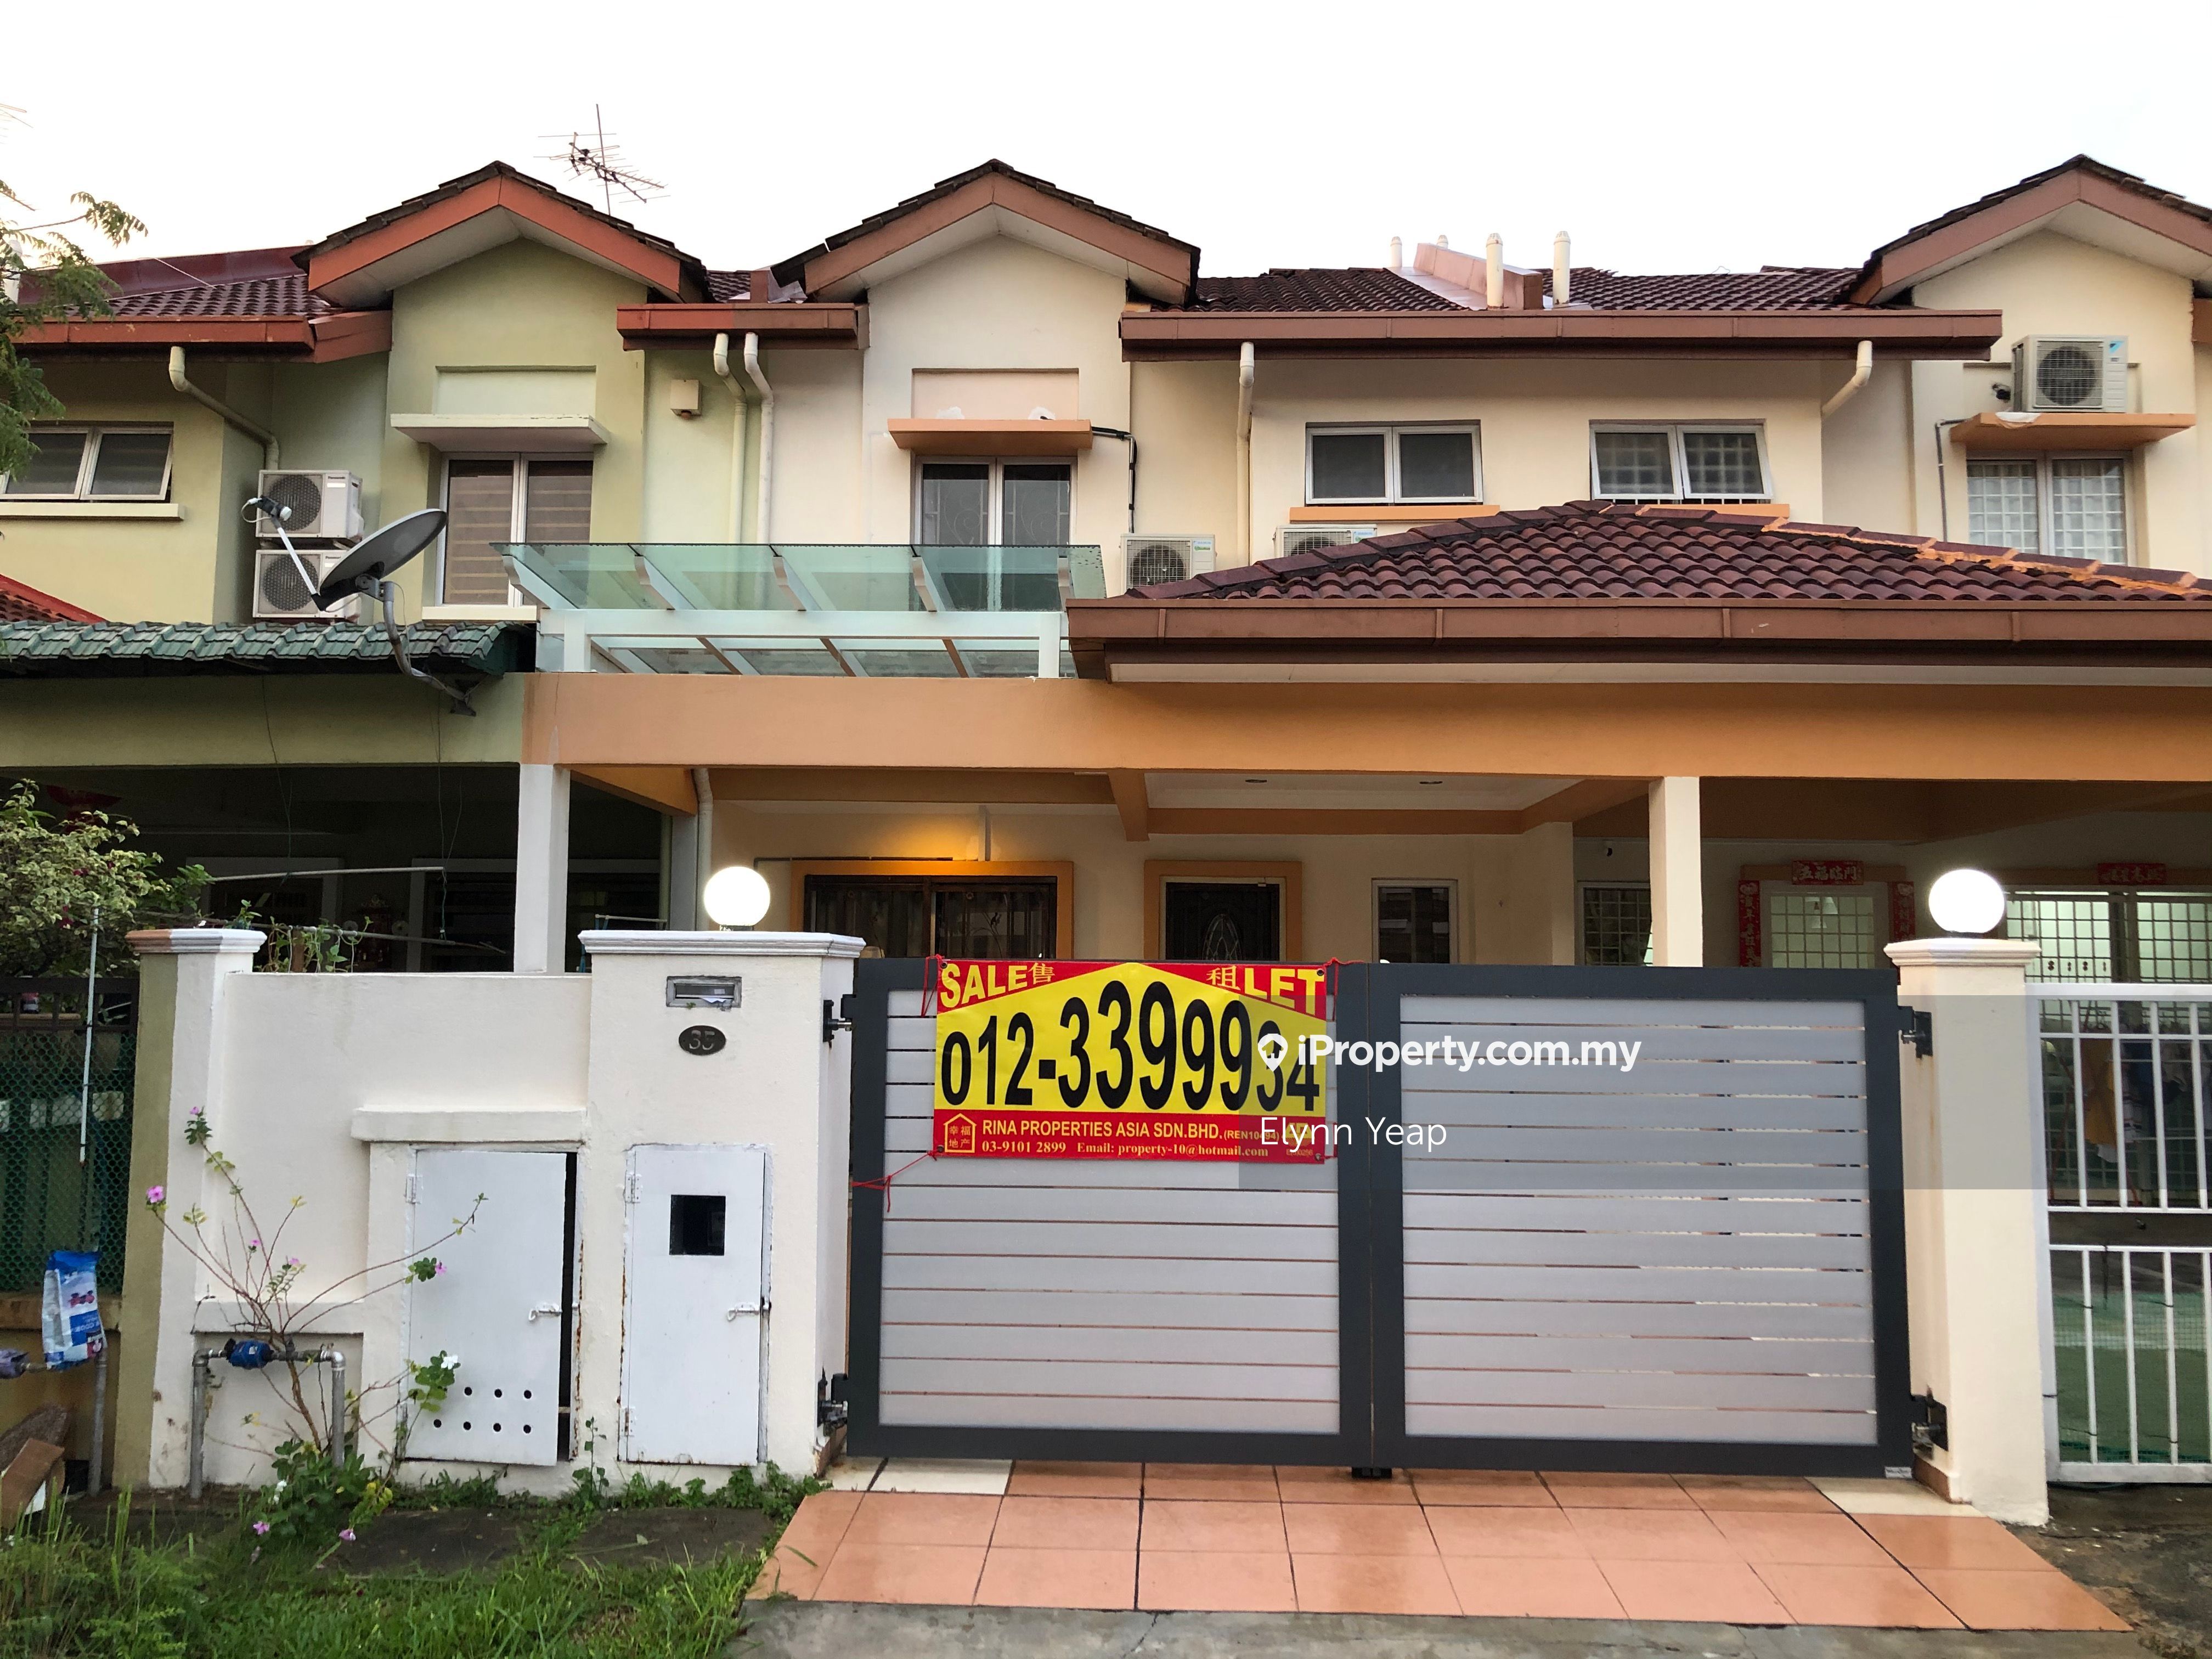 house for rent in shah alam